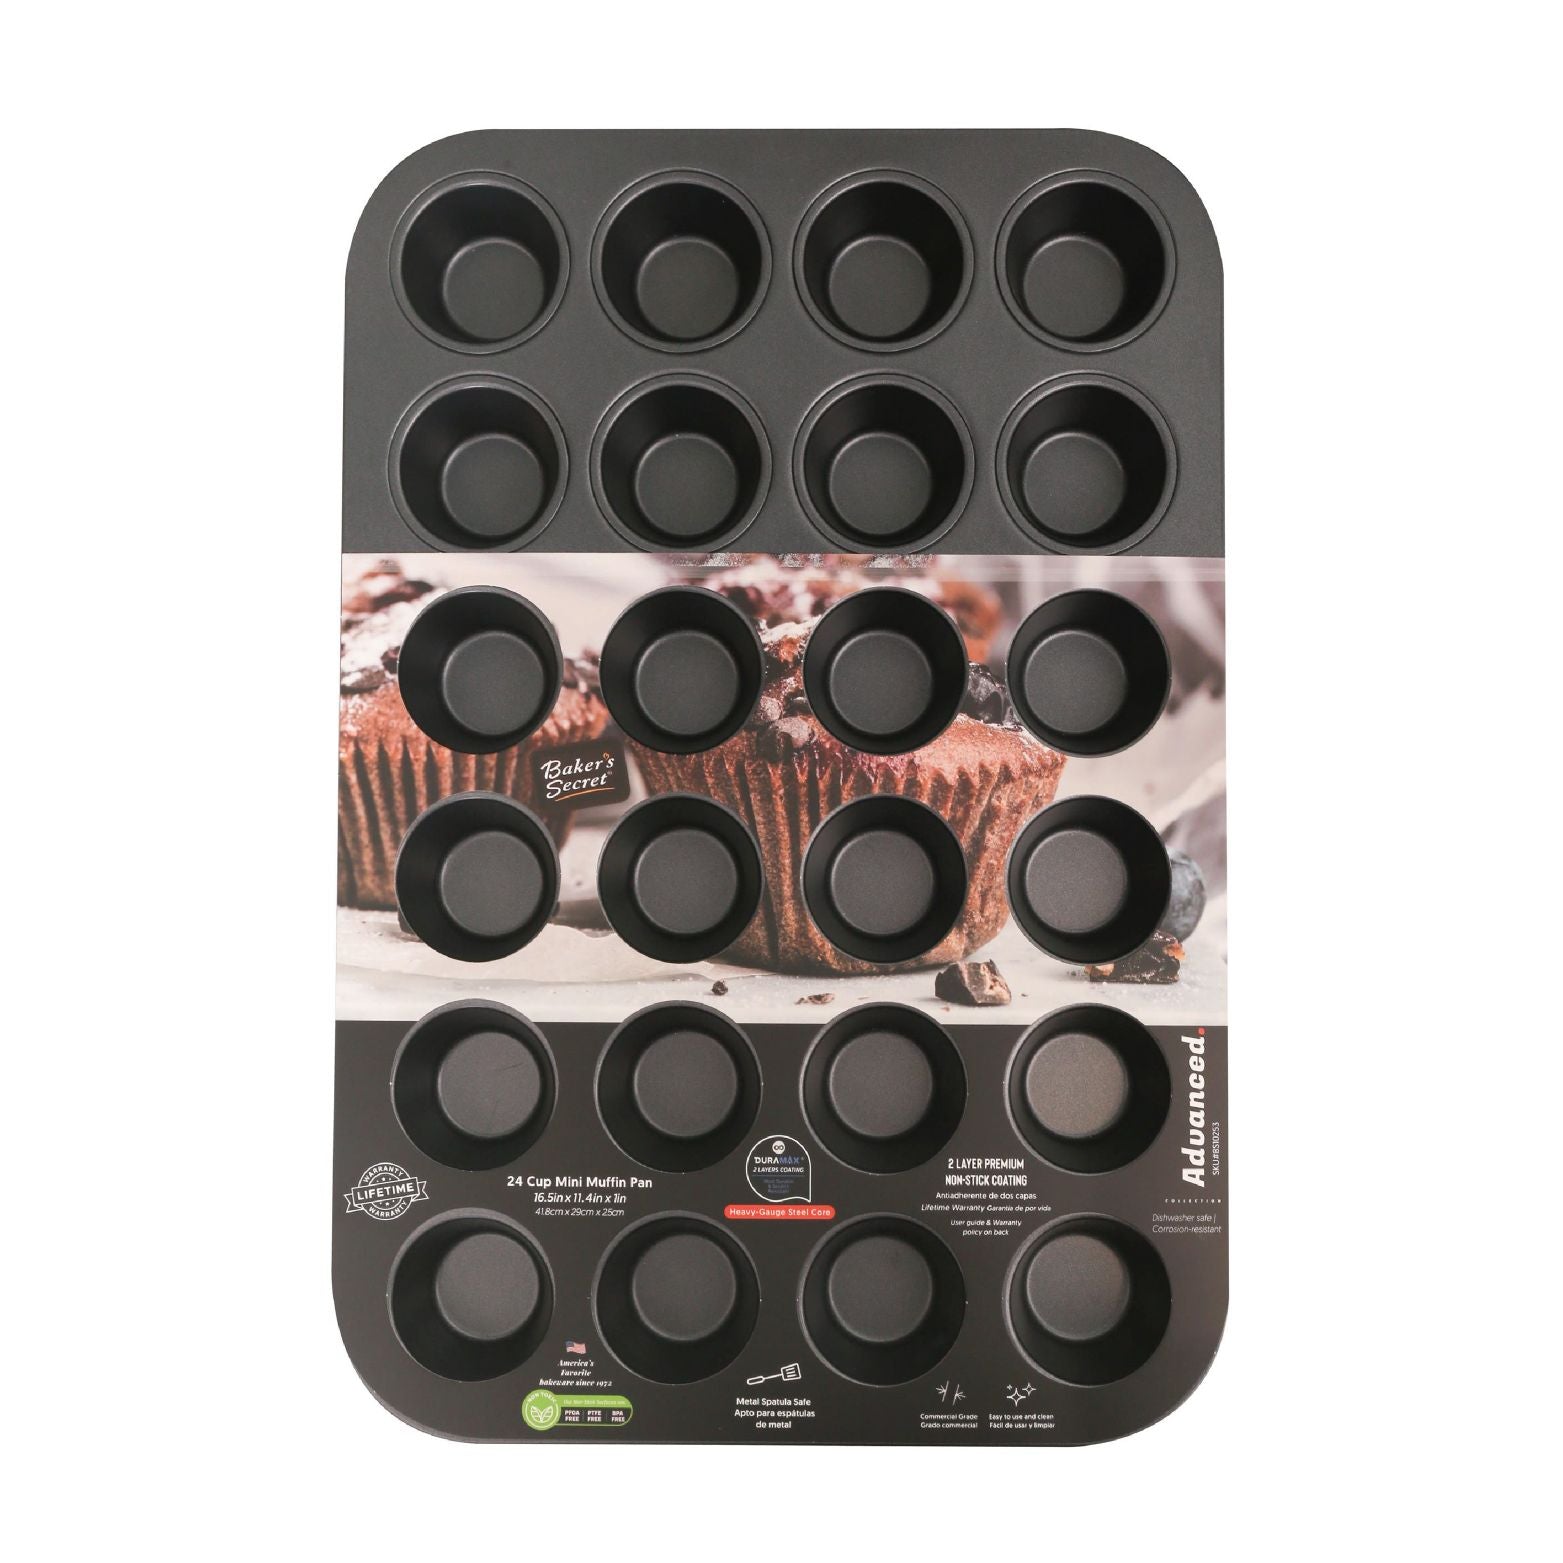 Save on Smart Living Mini Muffin Pan Non-Stick 24 Cup Order Online